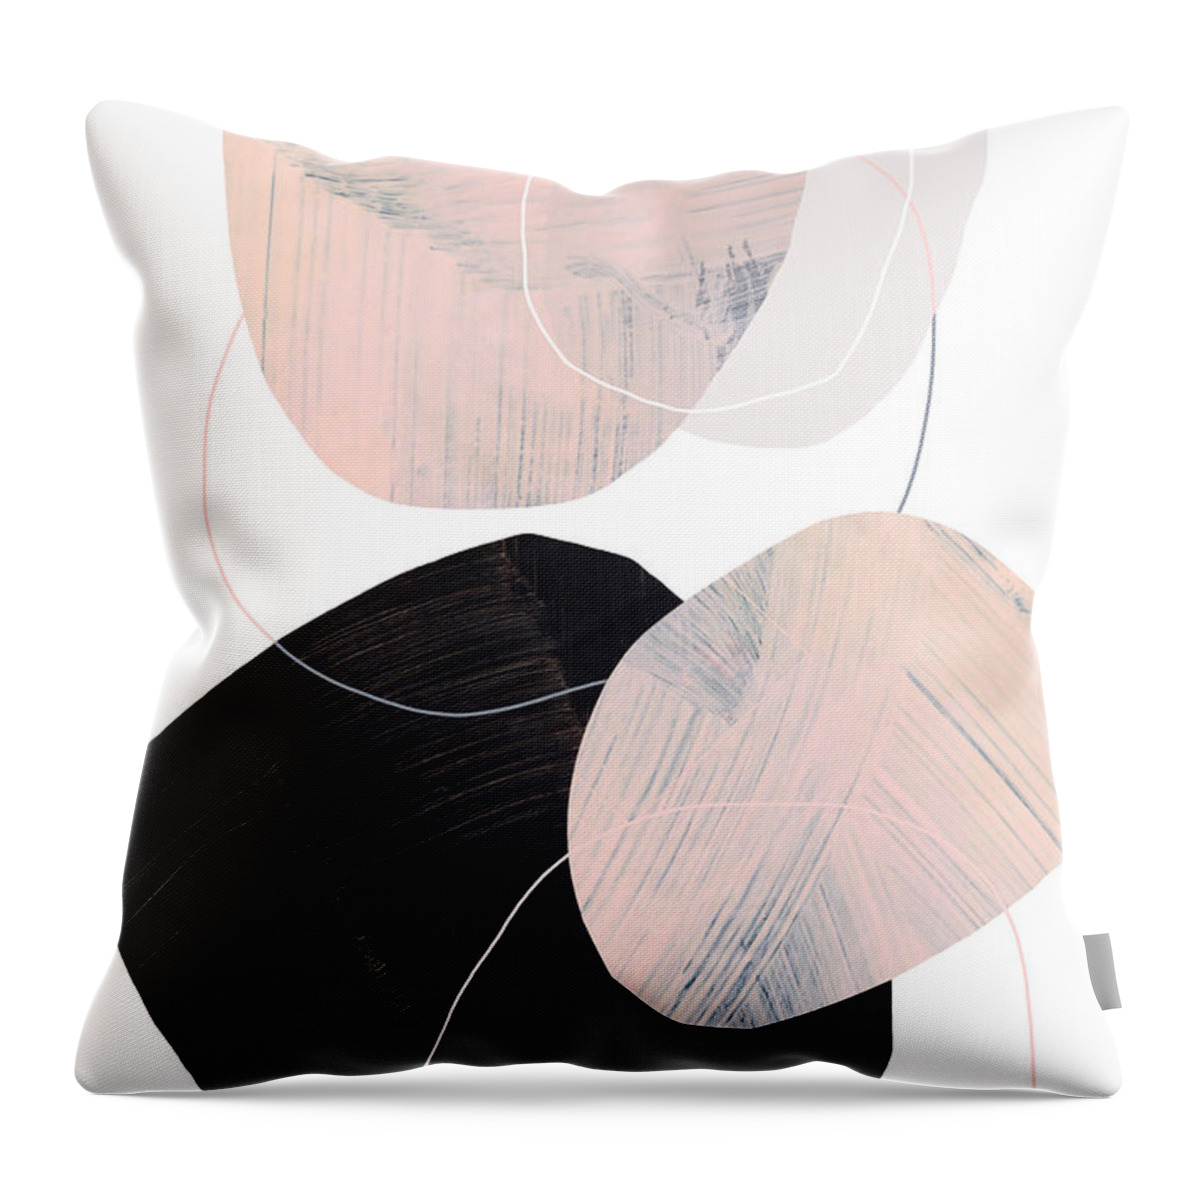 Blush Throw Pillow featuring the mixed media 0075-Moving by Anke Classen